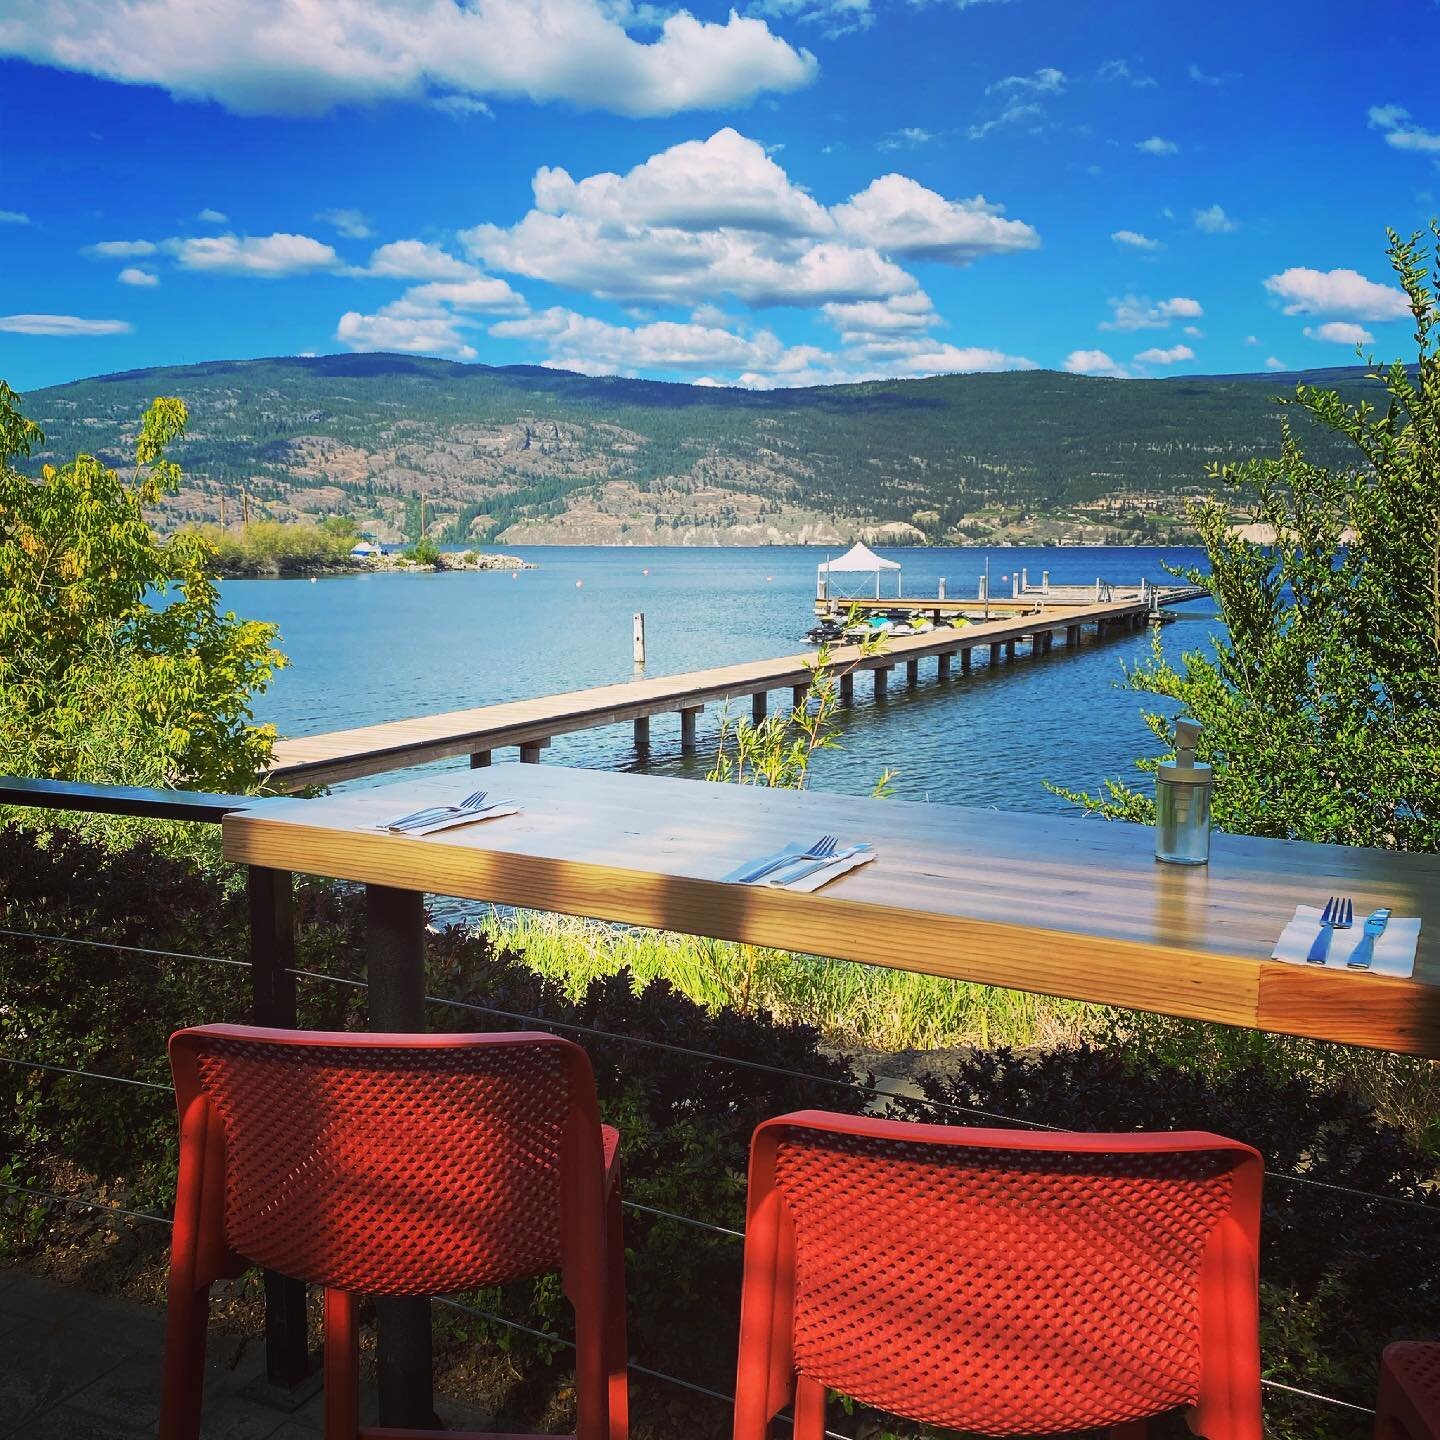 Some days just feel a little more normal than others. Like yesterday&rsquo;s dinner at @shaughnessyscove in Summerland with an old friend.

I love Summerland and have featured many unique experiences in the town in my south/central Okanagan Road Trip